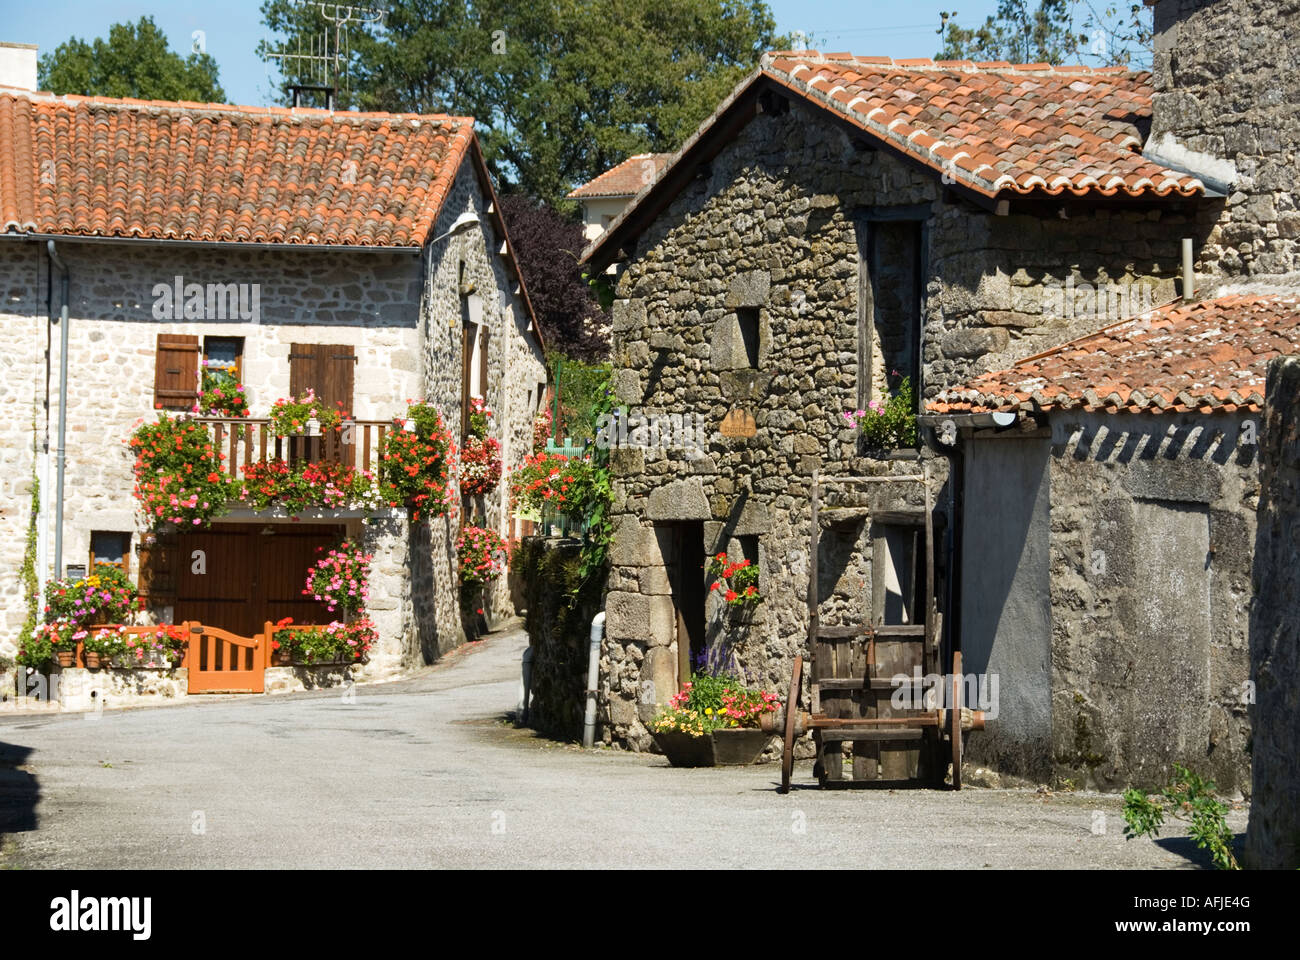 Image of a street scene in the French village of Montrol Senard Stock Photo